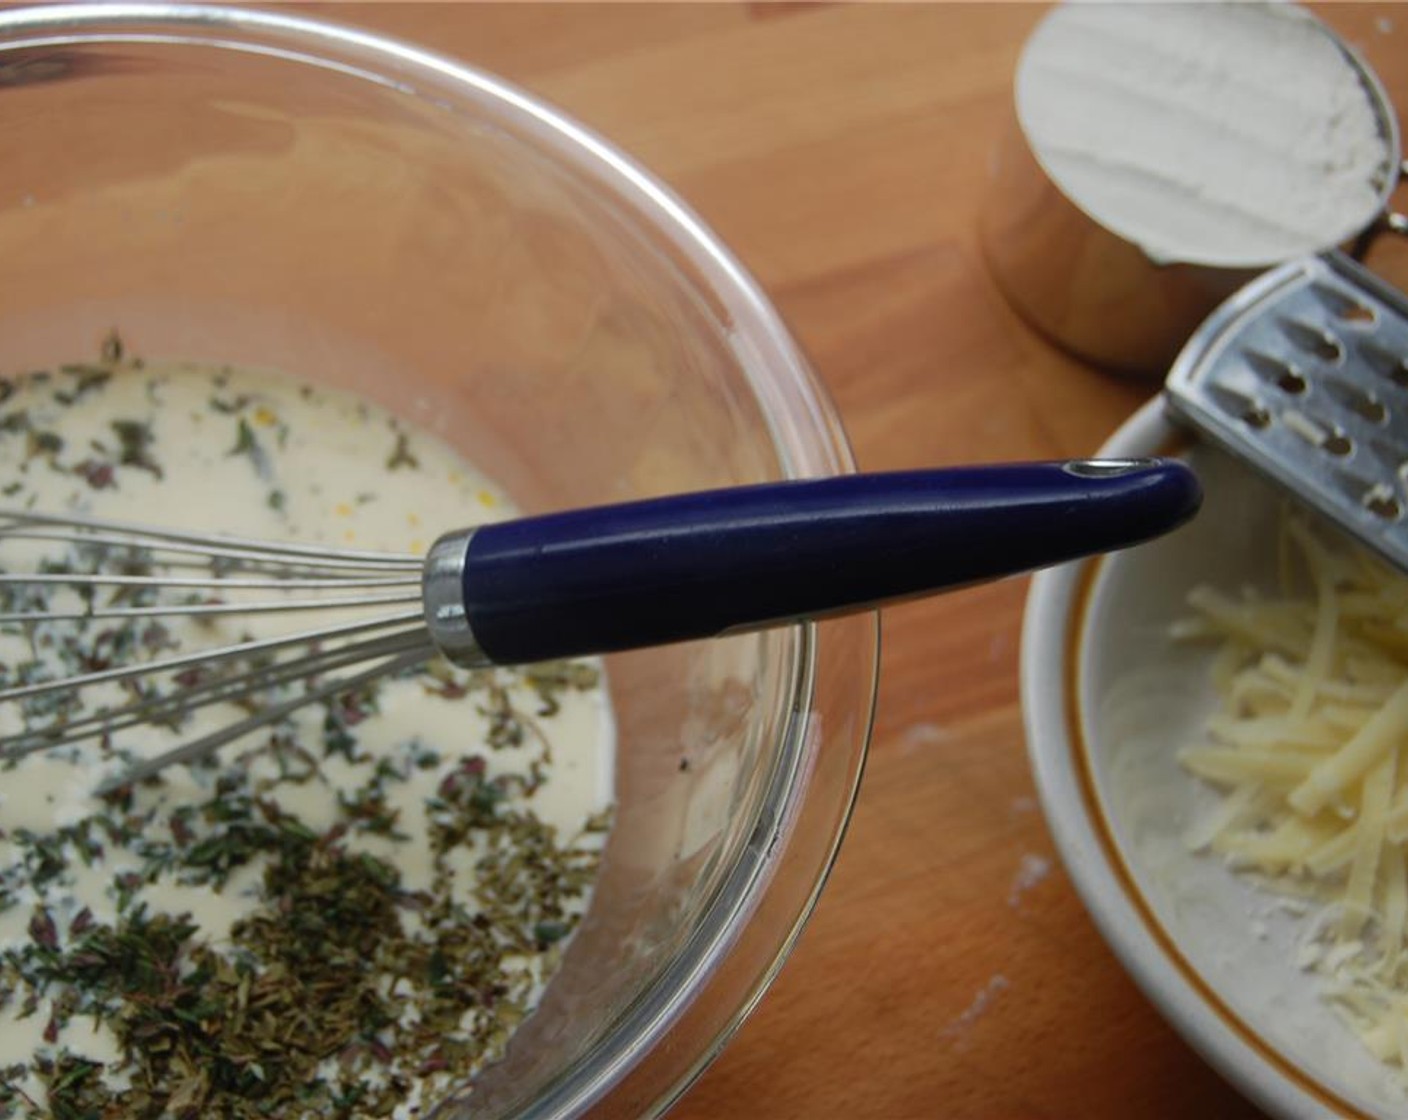 step 2 Stir in Cheddar Cheese (1/3 cup), Dried Oregano (1/2 tsp) and Dried Thyme (1 1/2 Tbsp). Let the batter rest for an hour.